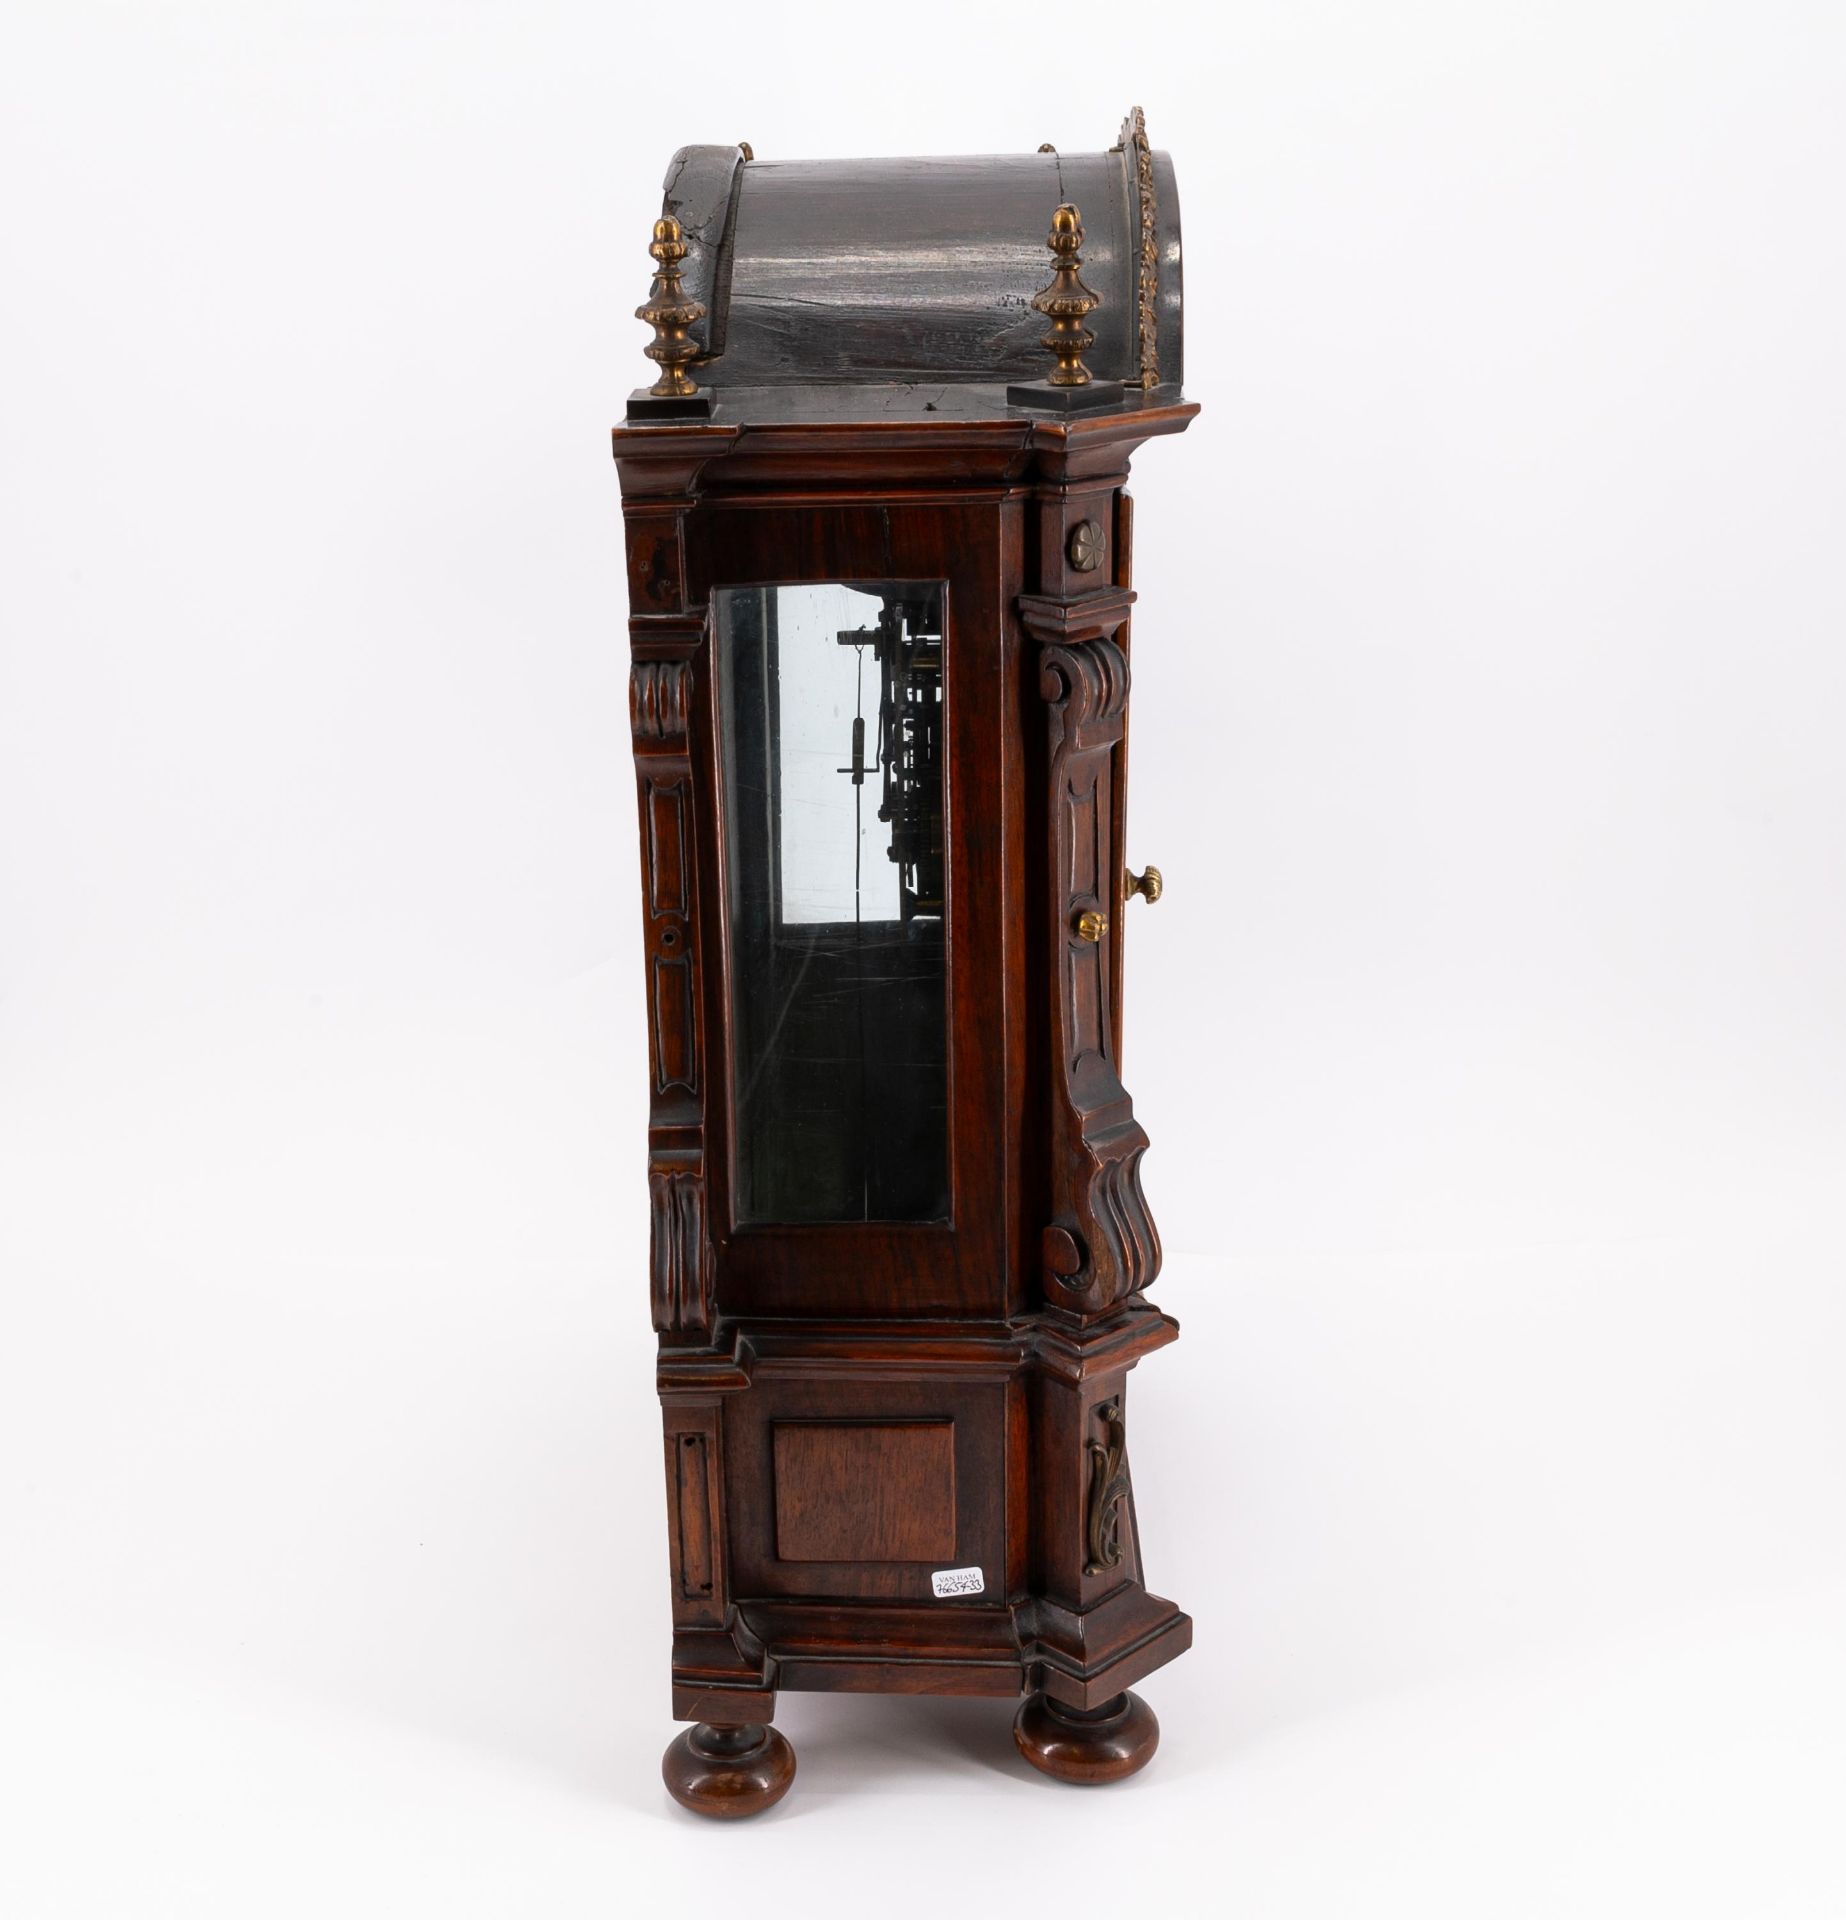 Philipp Kumperger: BRACKET CLOCK WITH MOVING EYE OF GOD MADE OF MAHOGANY, BRONZE, BRASS AND GLASS - Image 4 of 6